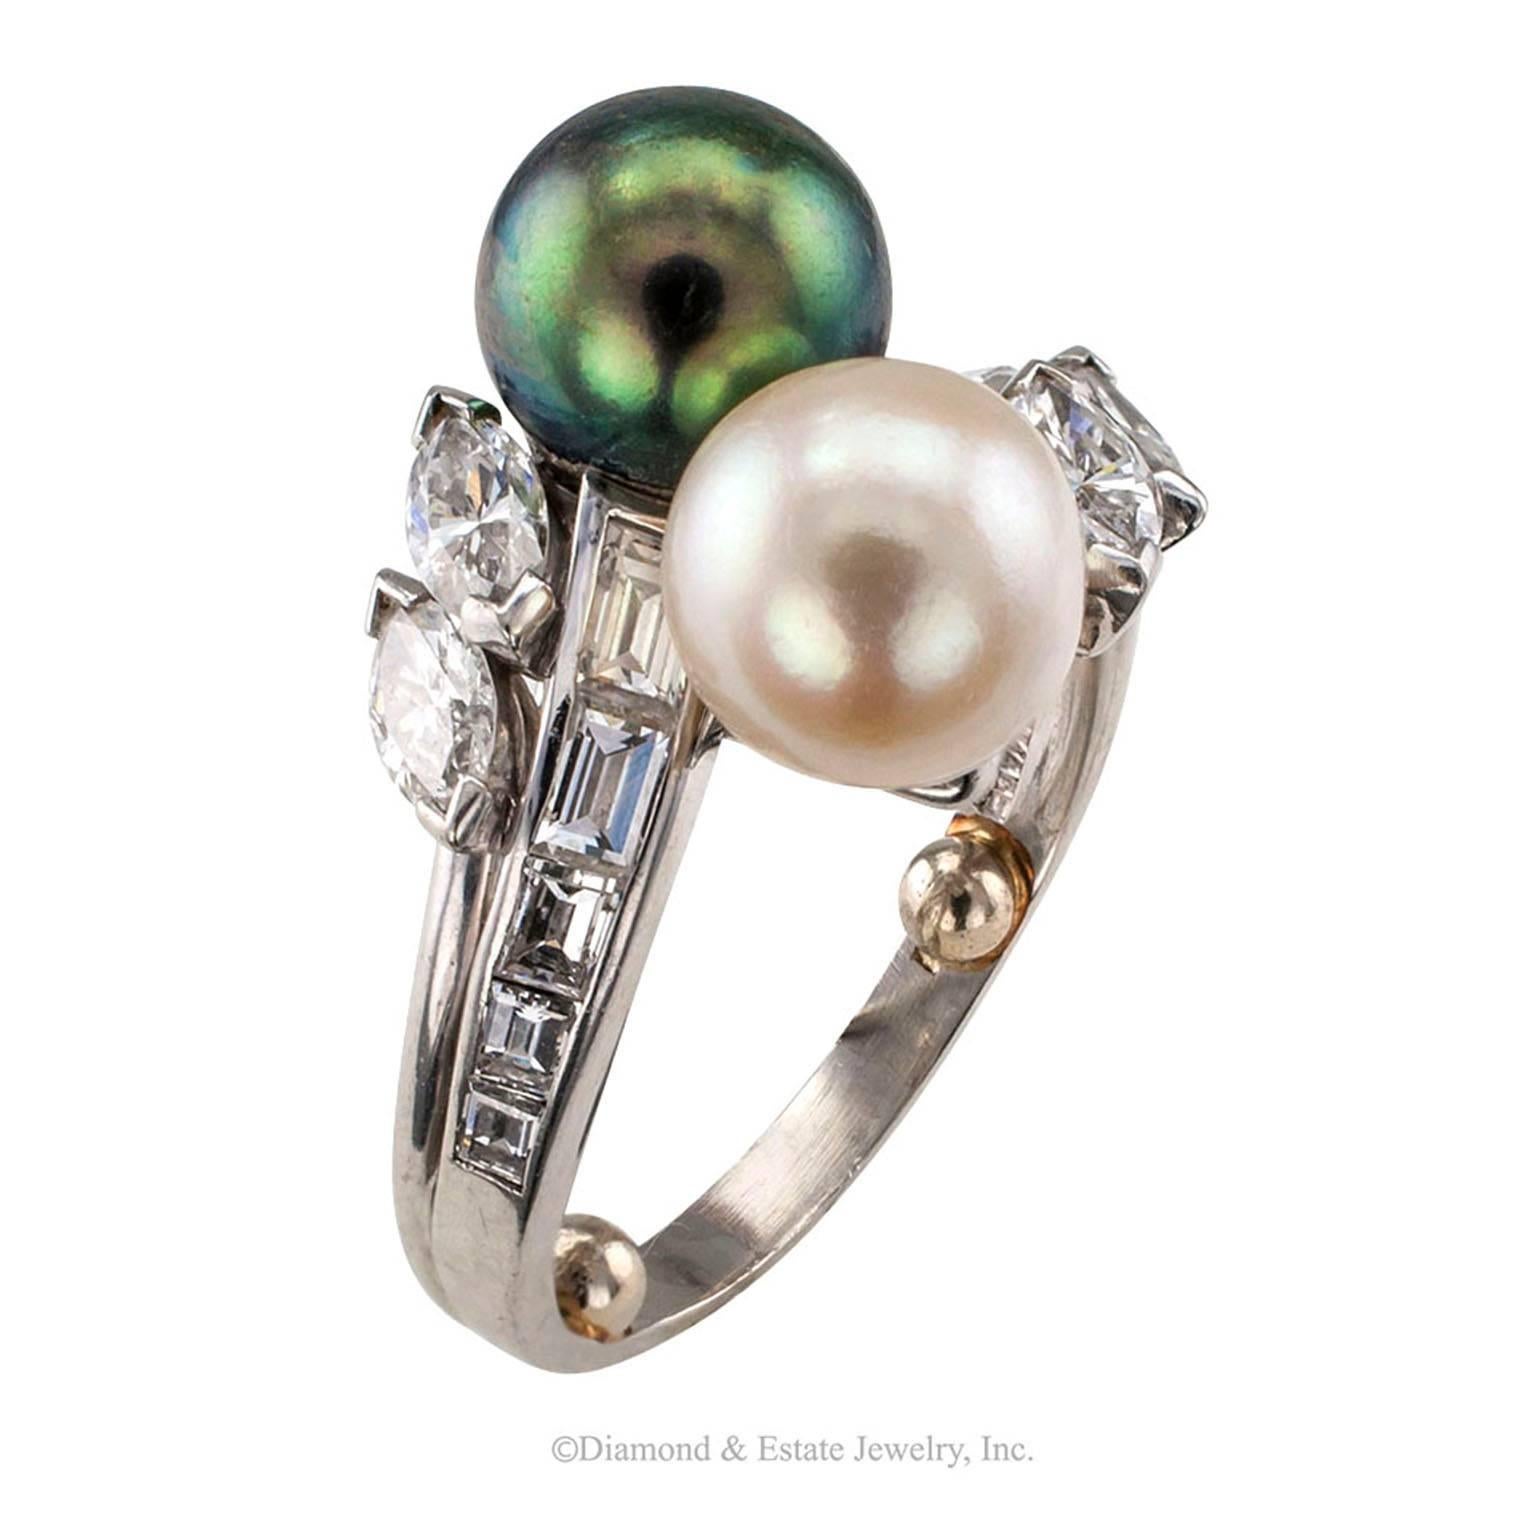 Gubelin 1950s Ying-Yang Pearl Diamond Bypass Ring

Gubelin ying-yang pearl and diamond bypass platinum ring circa 1950. Ultra refined mid-century elegance portrayed by the best quality materials and workmanship that money can buy.  Gubelin a name